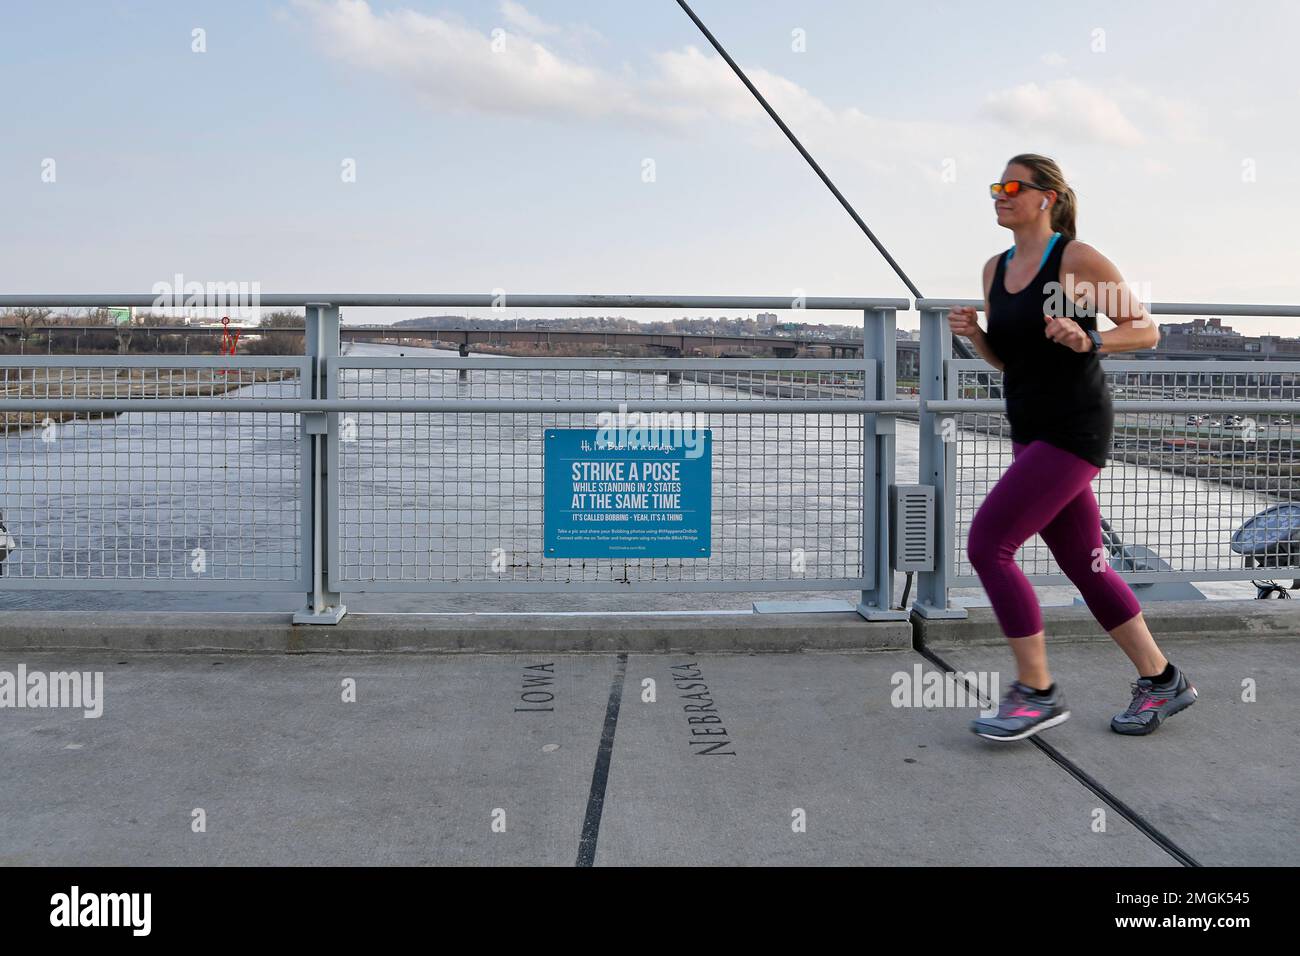 https://c8.alamy.com/comp/2MGK545/in-this-april-6-2020-photo-a-jogger-on-the-bob-kerrey-pedestrian-bridge-over-the-missouri-river-is-about-to-cross-over-from-omaha-neb-to-council-bluffs-iowa-while-most-governors-have-imposed-stay-at-home-orders-to-slow-the-spread-of-the-coronavirus-leaders-of-a-handful-of-states-have-rejected-such-action-ap-photonati-harnik-2MGK545.jpg